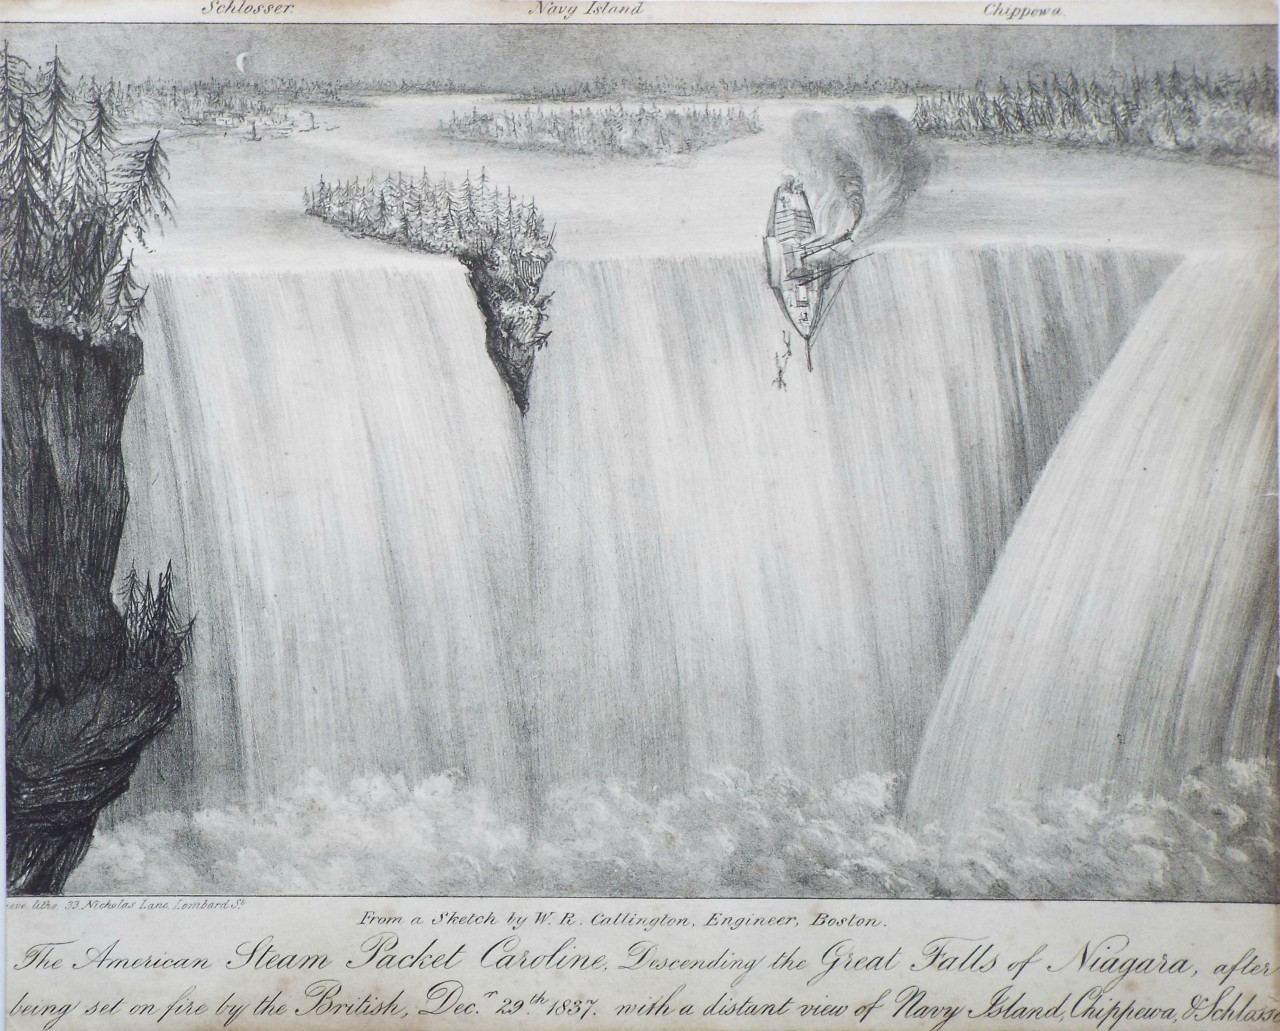 Lithograph - From a sketch by W R Callington Engineer Boston - The American Steam Packet Caroline Descending the Great Falls of Niagara after being set on fire by the British Dec 29th 1837 with a distant view of Navy Island Chippewa & Schlosser - Grieve